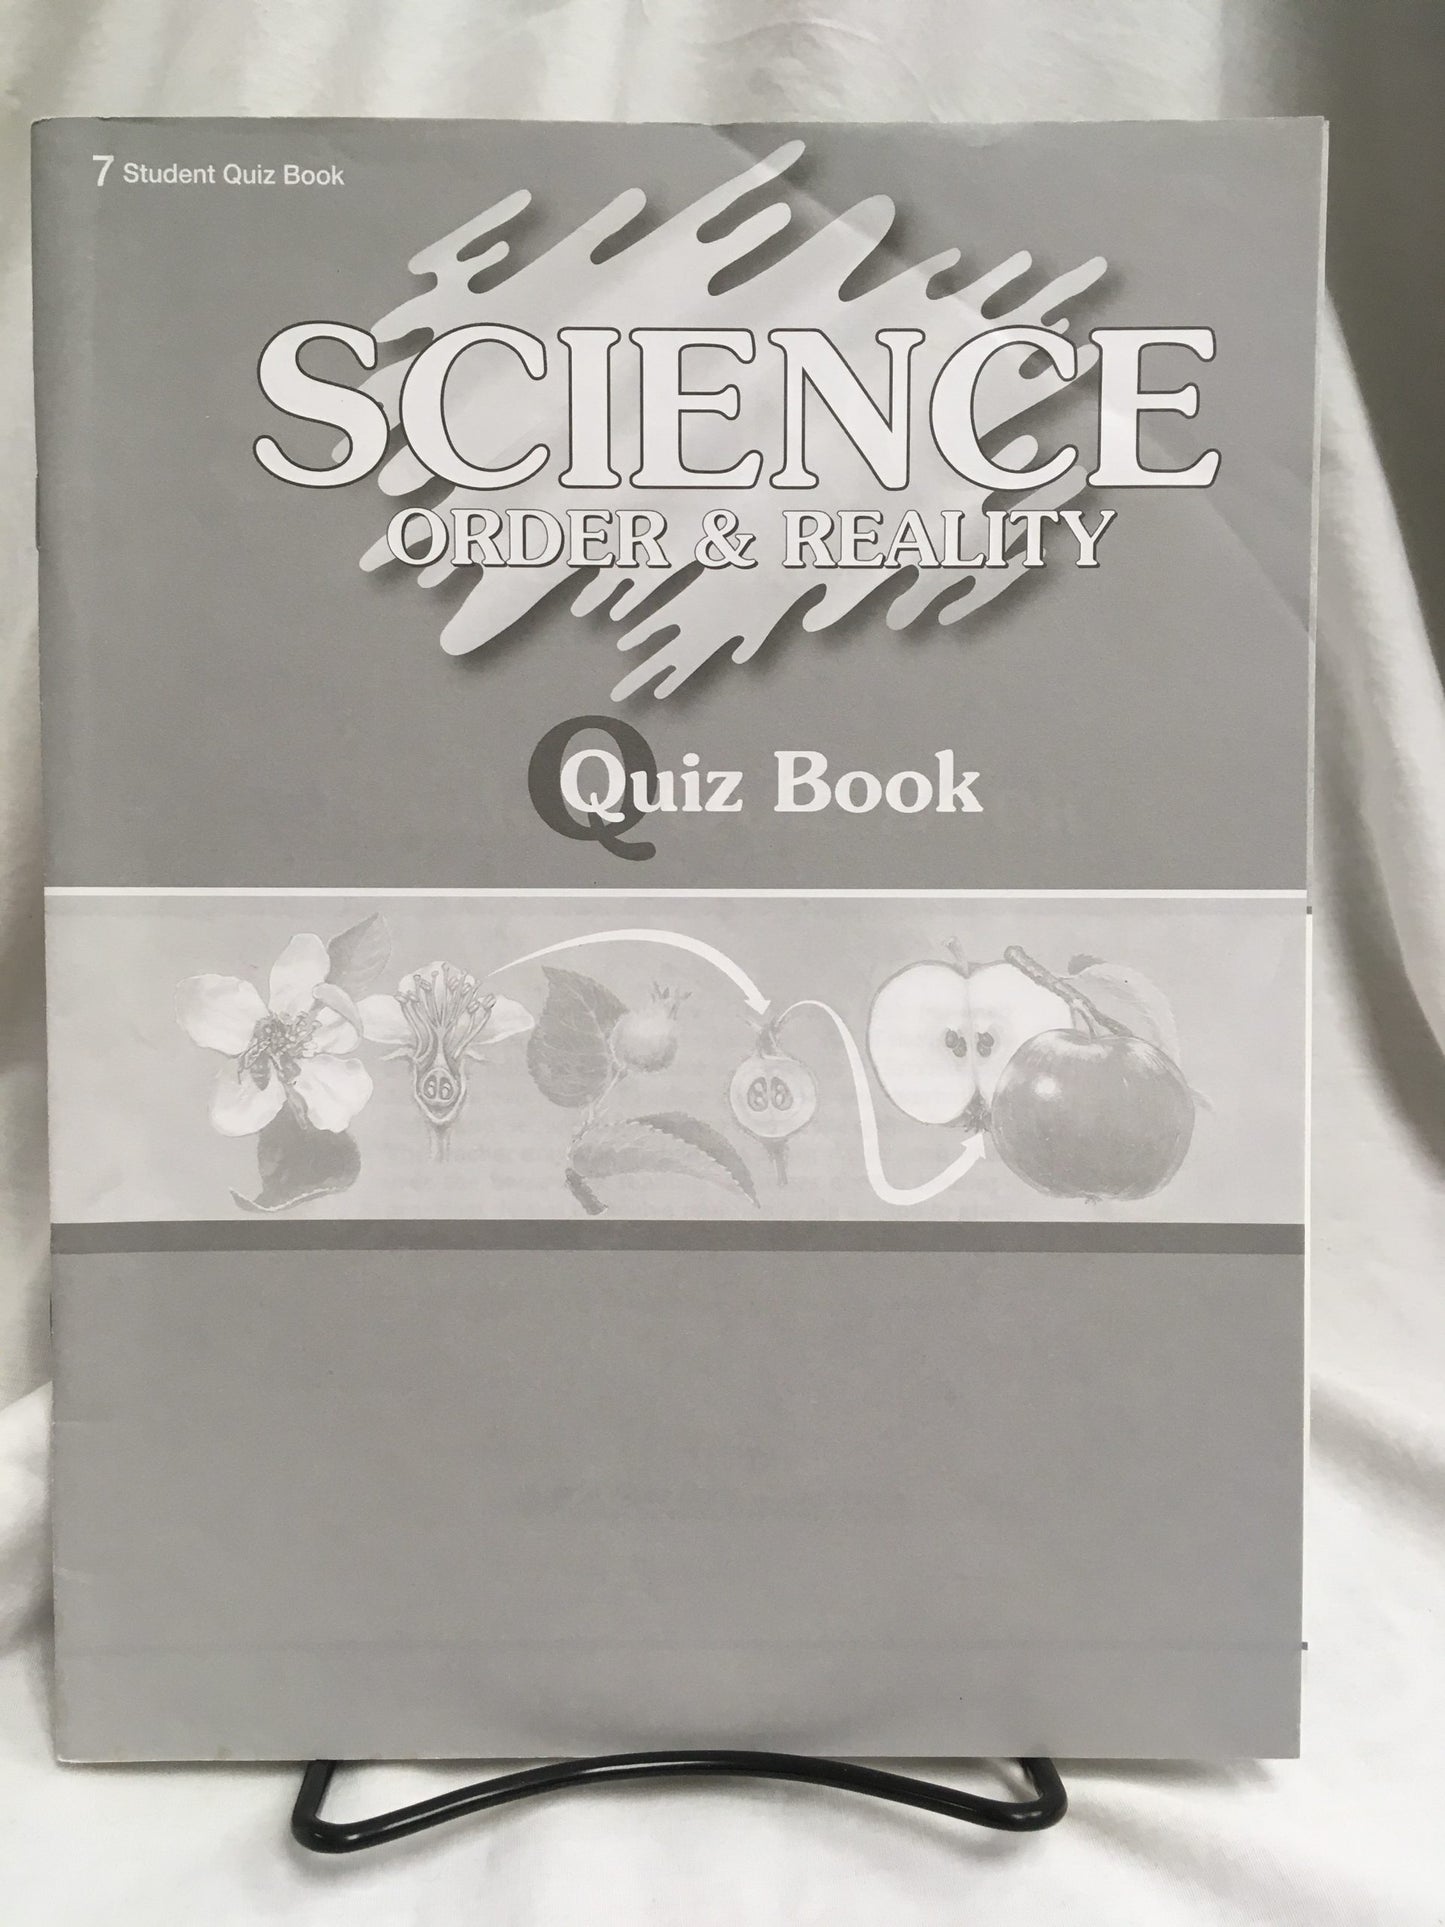 Science Order and Reality - Quizzes